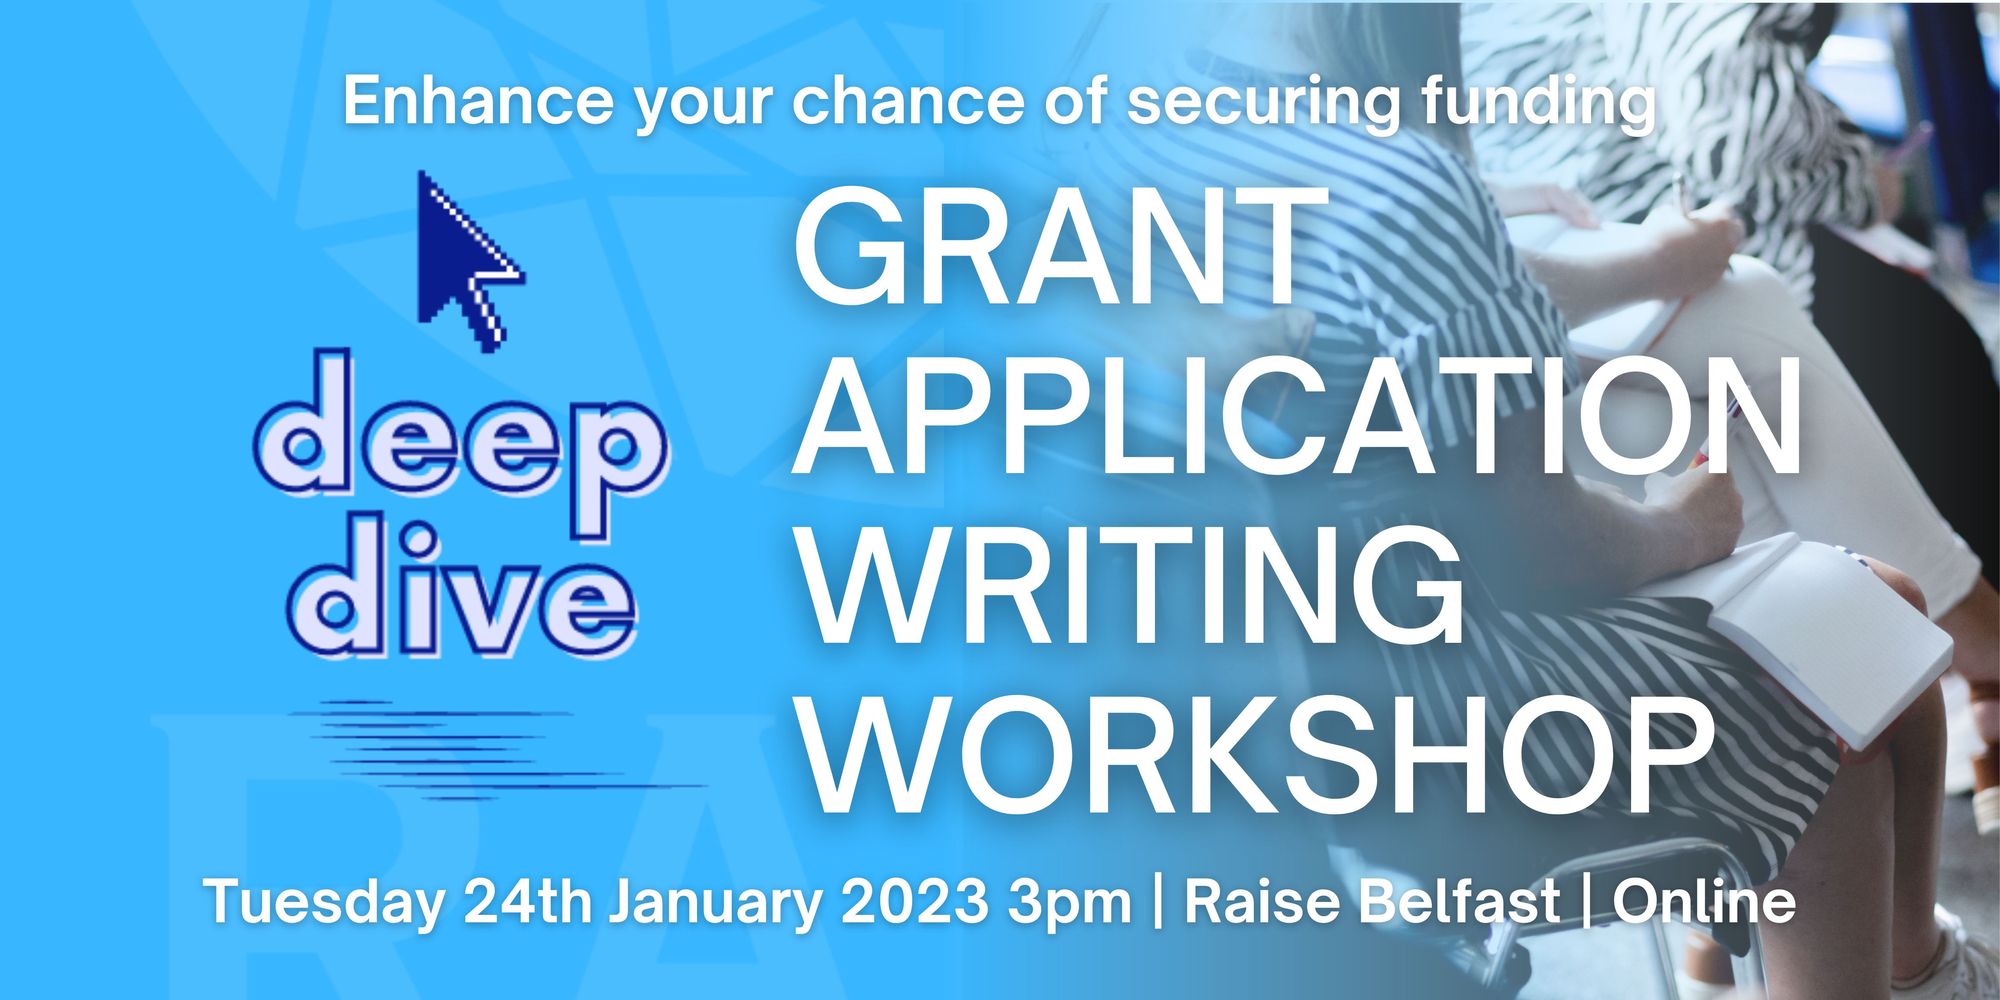 A graphic promoting a Deep Dive workshop on grant writing skills on 24th January